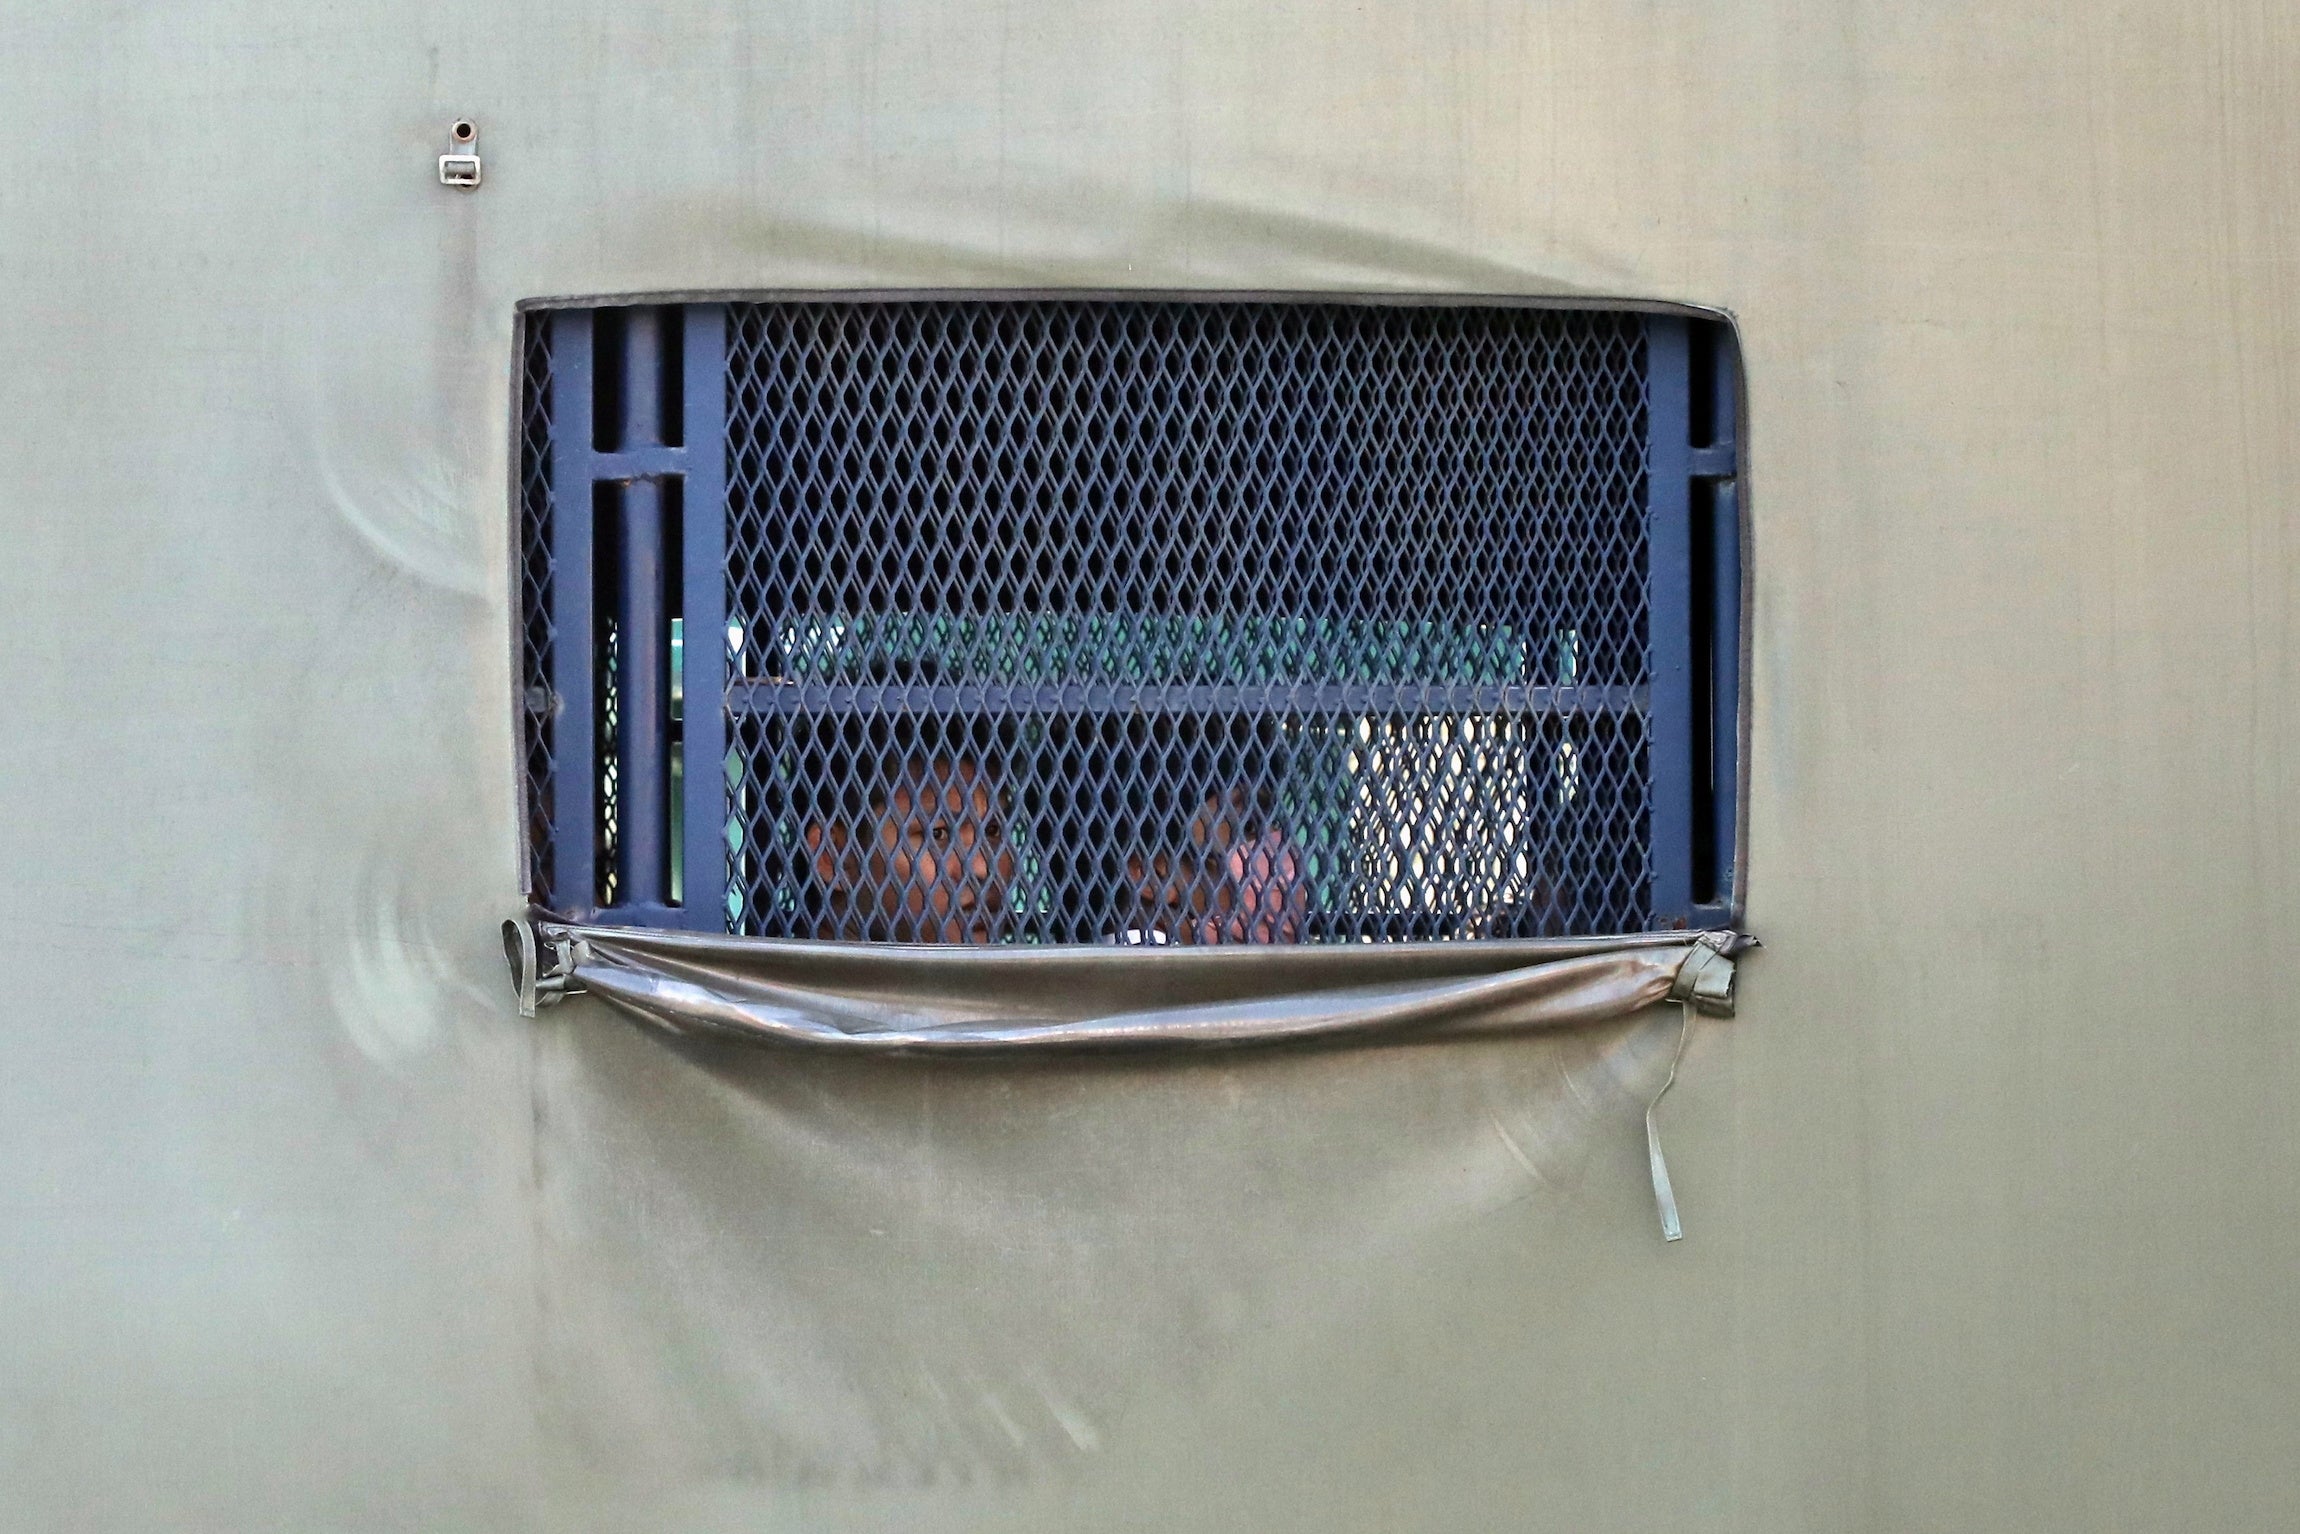 Immigration authorities transport Myanmar nationals before their deportation from Malaysia.